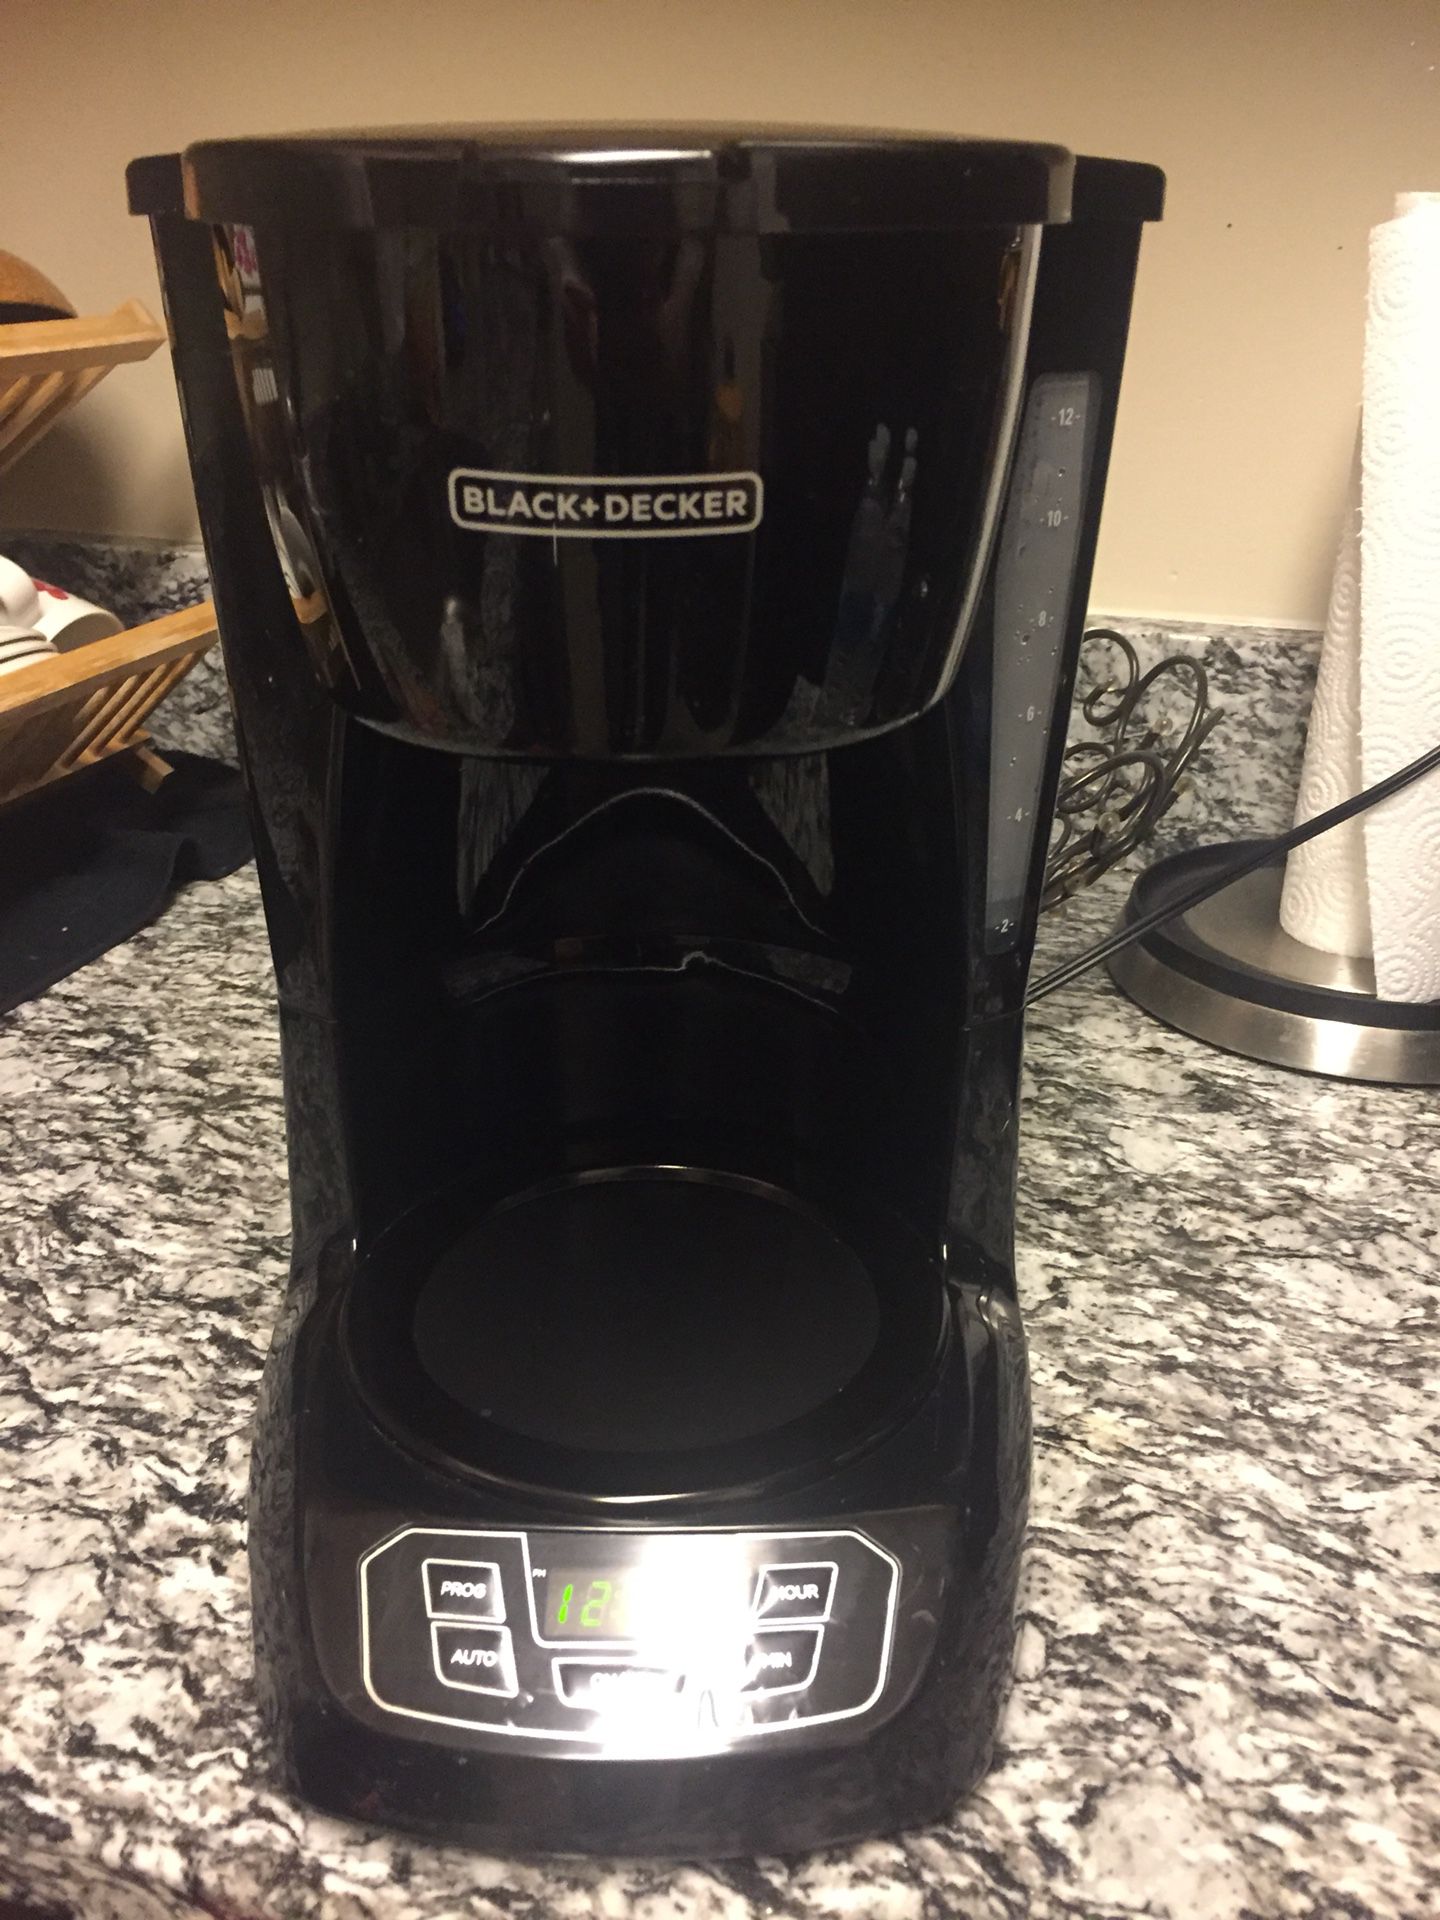 12 cup black and decker coffee maker